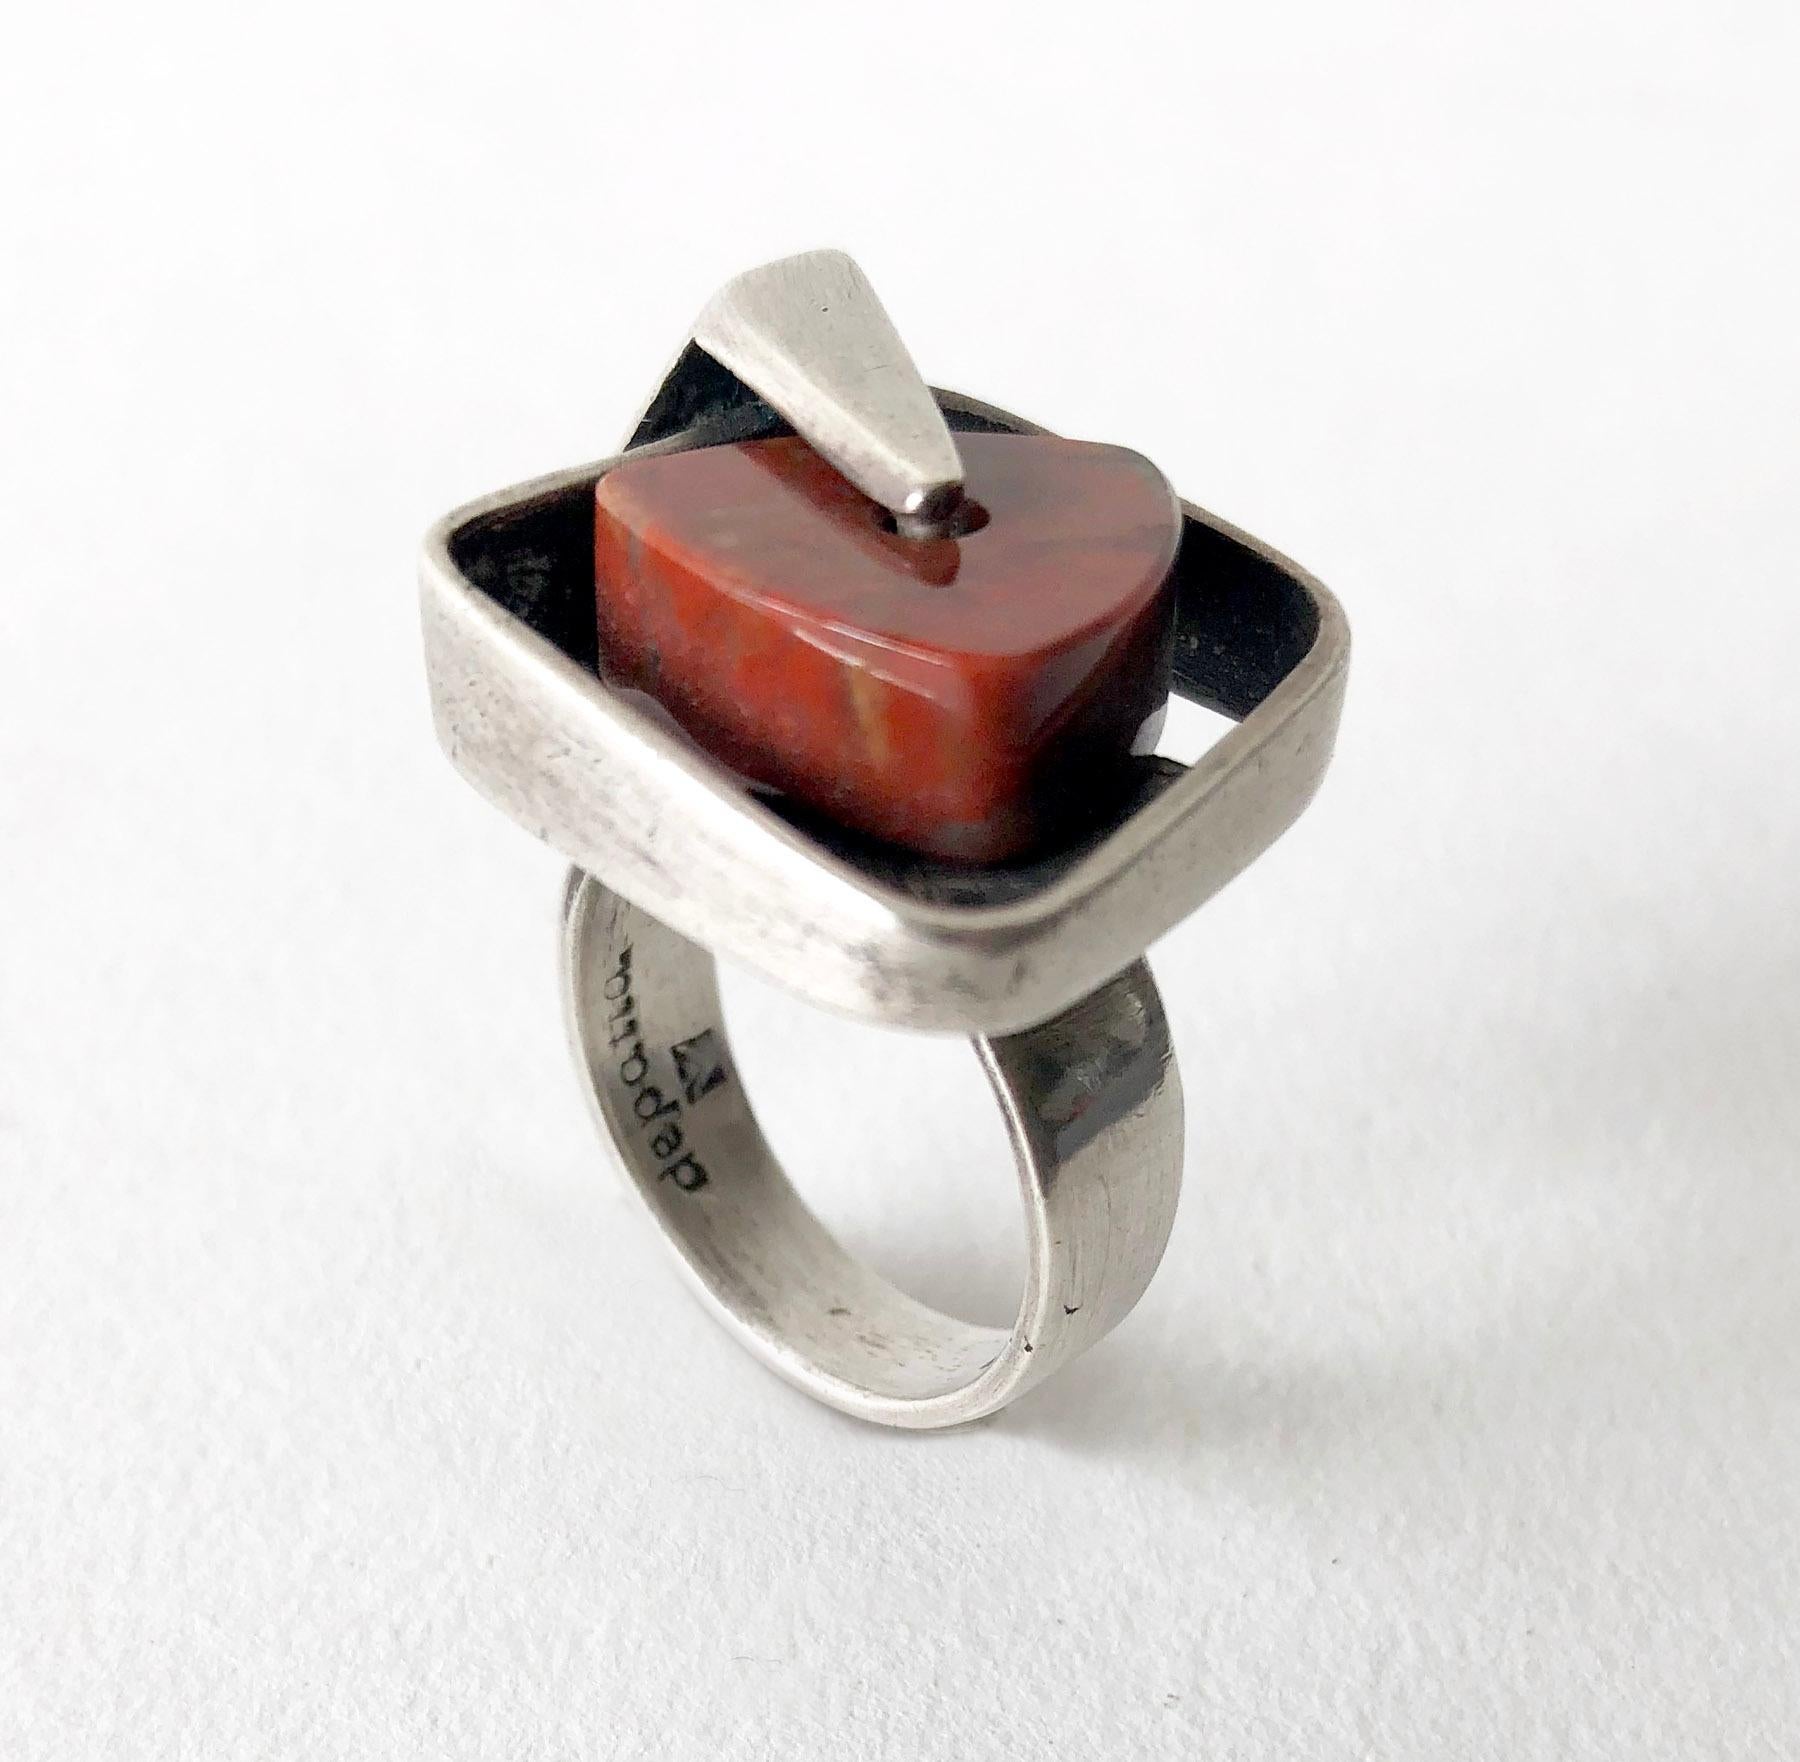 Sterling silver ring with triangular agate stone that spins within its setting, created by Margaret De Patta of San Francisco, California.  Ring is a finger size 6.5 to 7.  Signed De Patta and the artists' hallmark.  In very good vintage